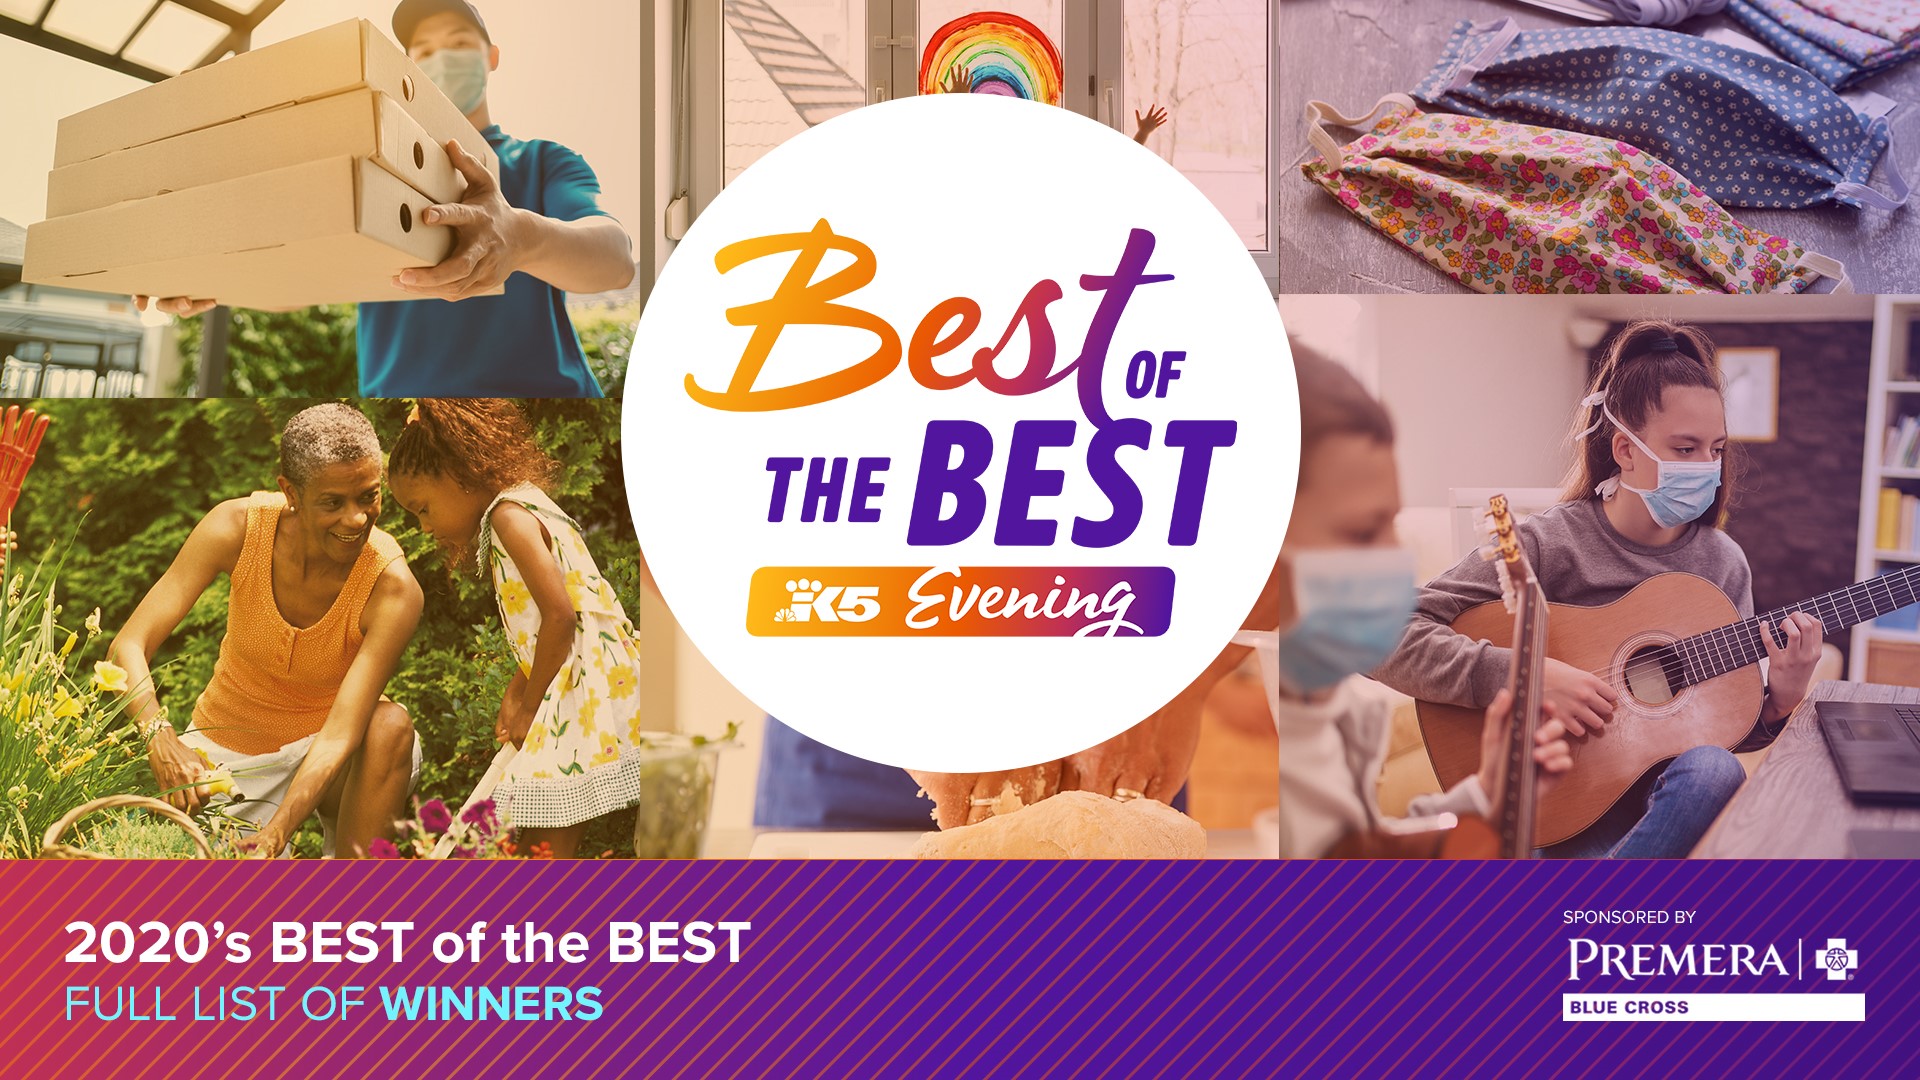 You nominated your favorites in 10 special categories for a special year. These are the winners of the hard-earned title, "Best of the Best". Sponsored by Premera.